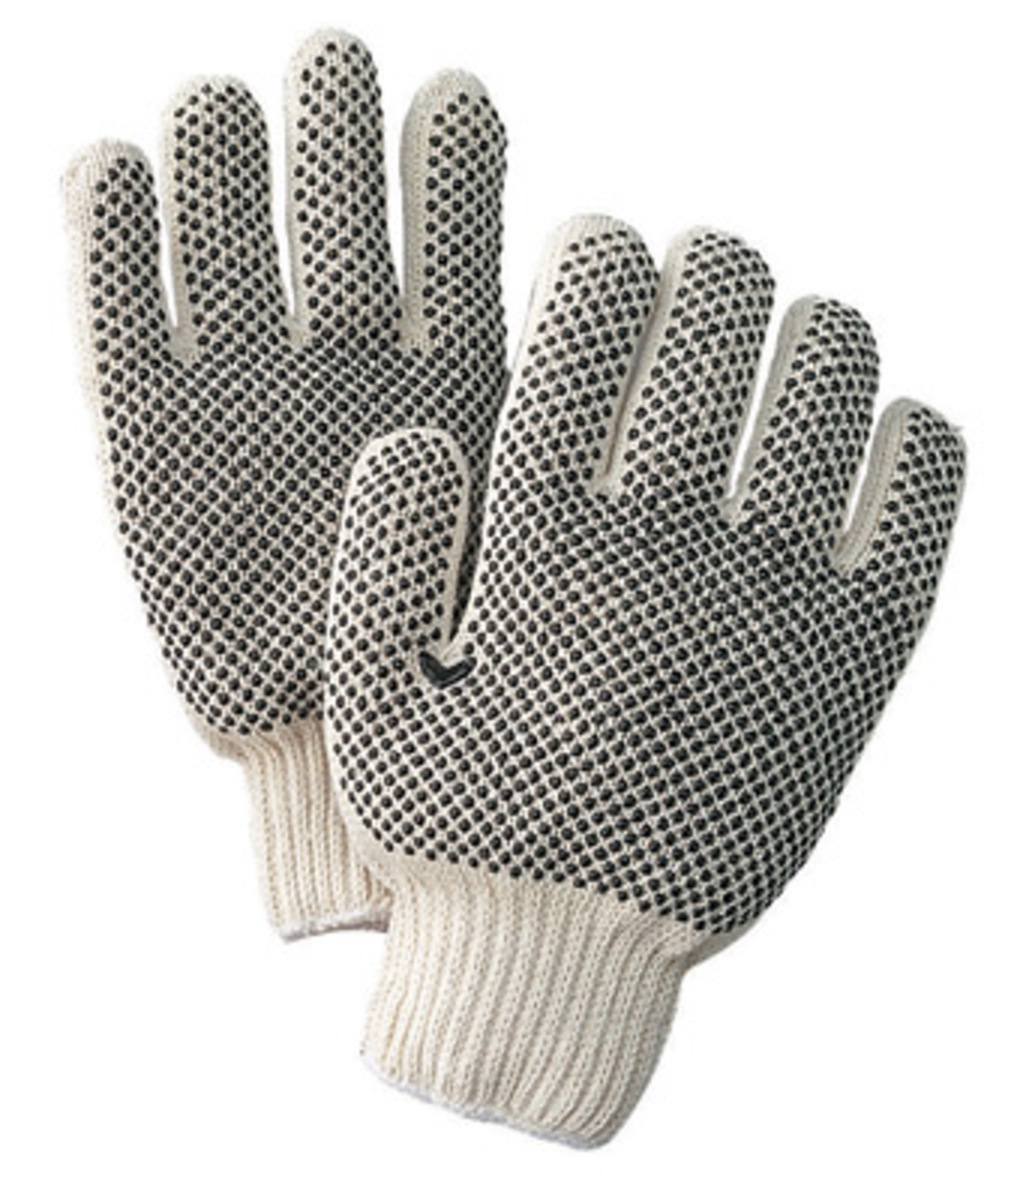 General Purpose Cotton Gloves for Sale online at autumn supply